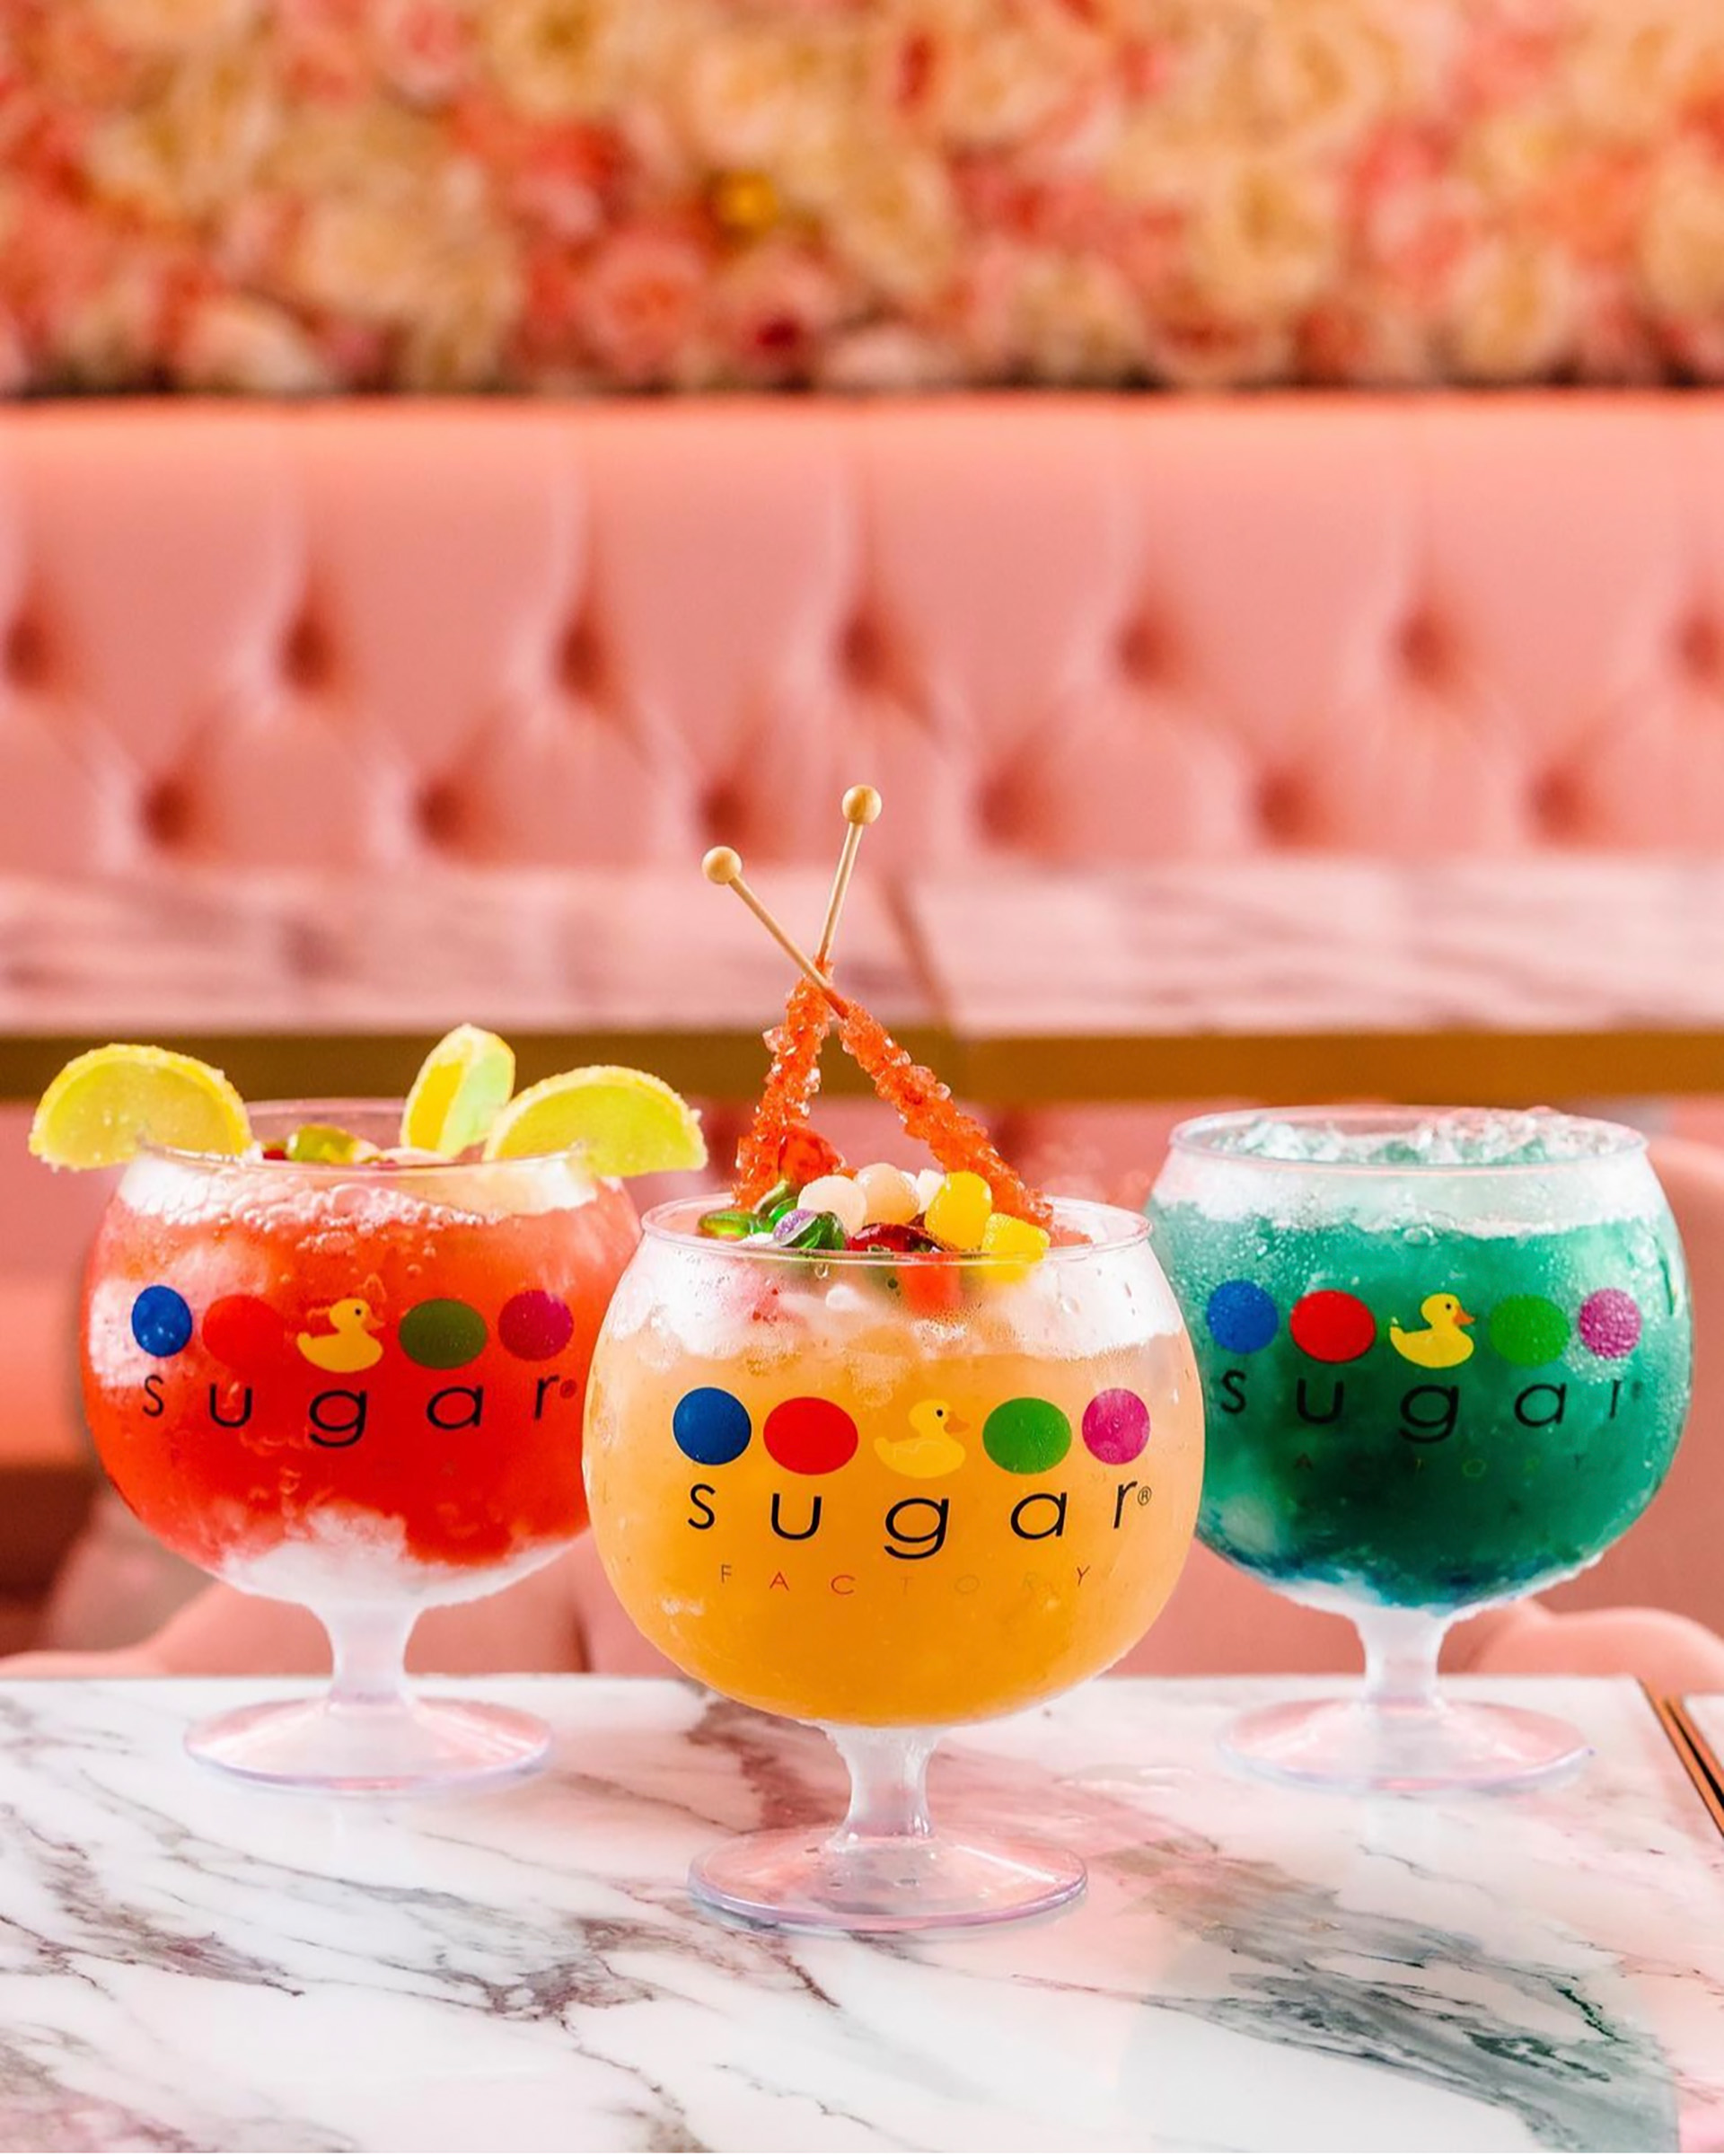 Sugar Factory has restaurants in more than 20 cities in the United States, as well as in other countries such as the United Arab Emirates